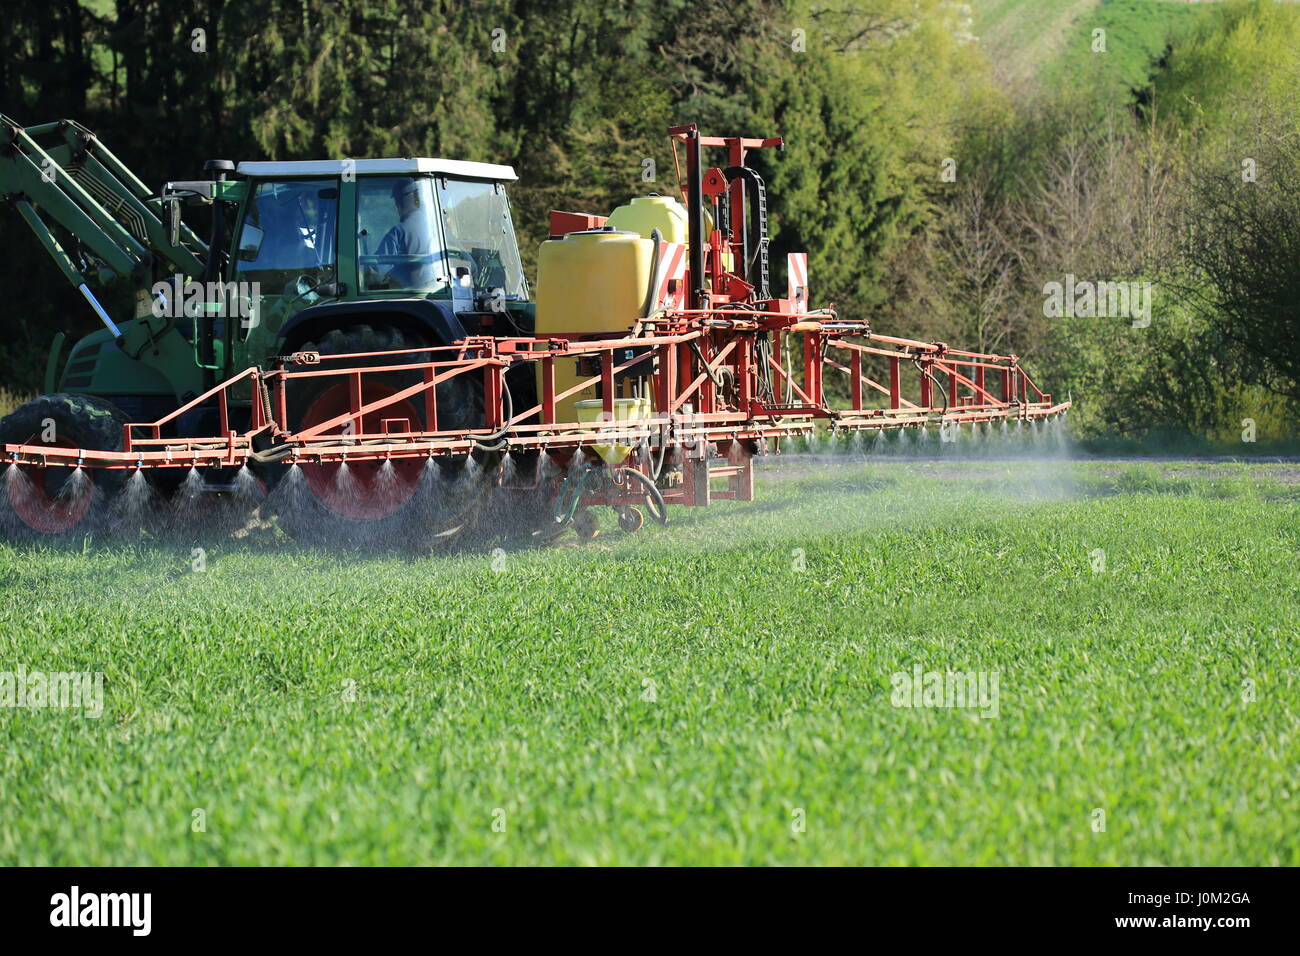 A Tractor spraying agriculture pesticide Stock Photo